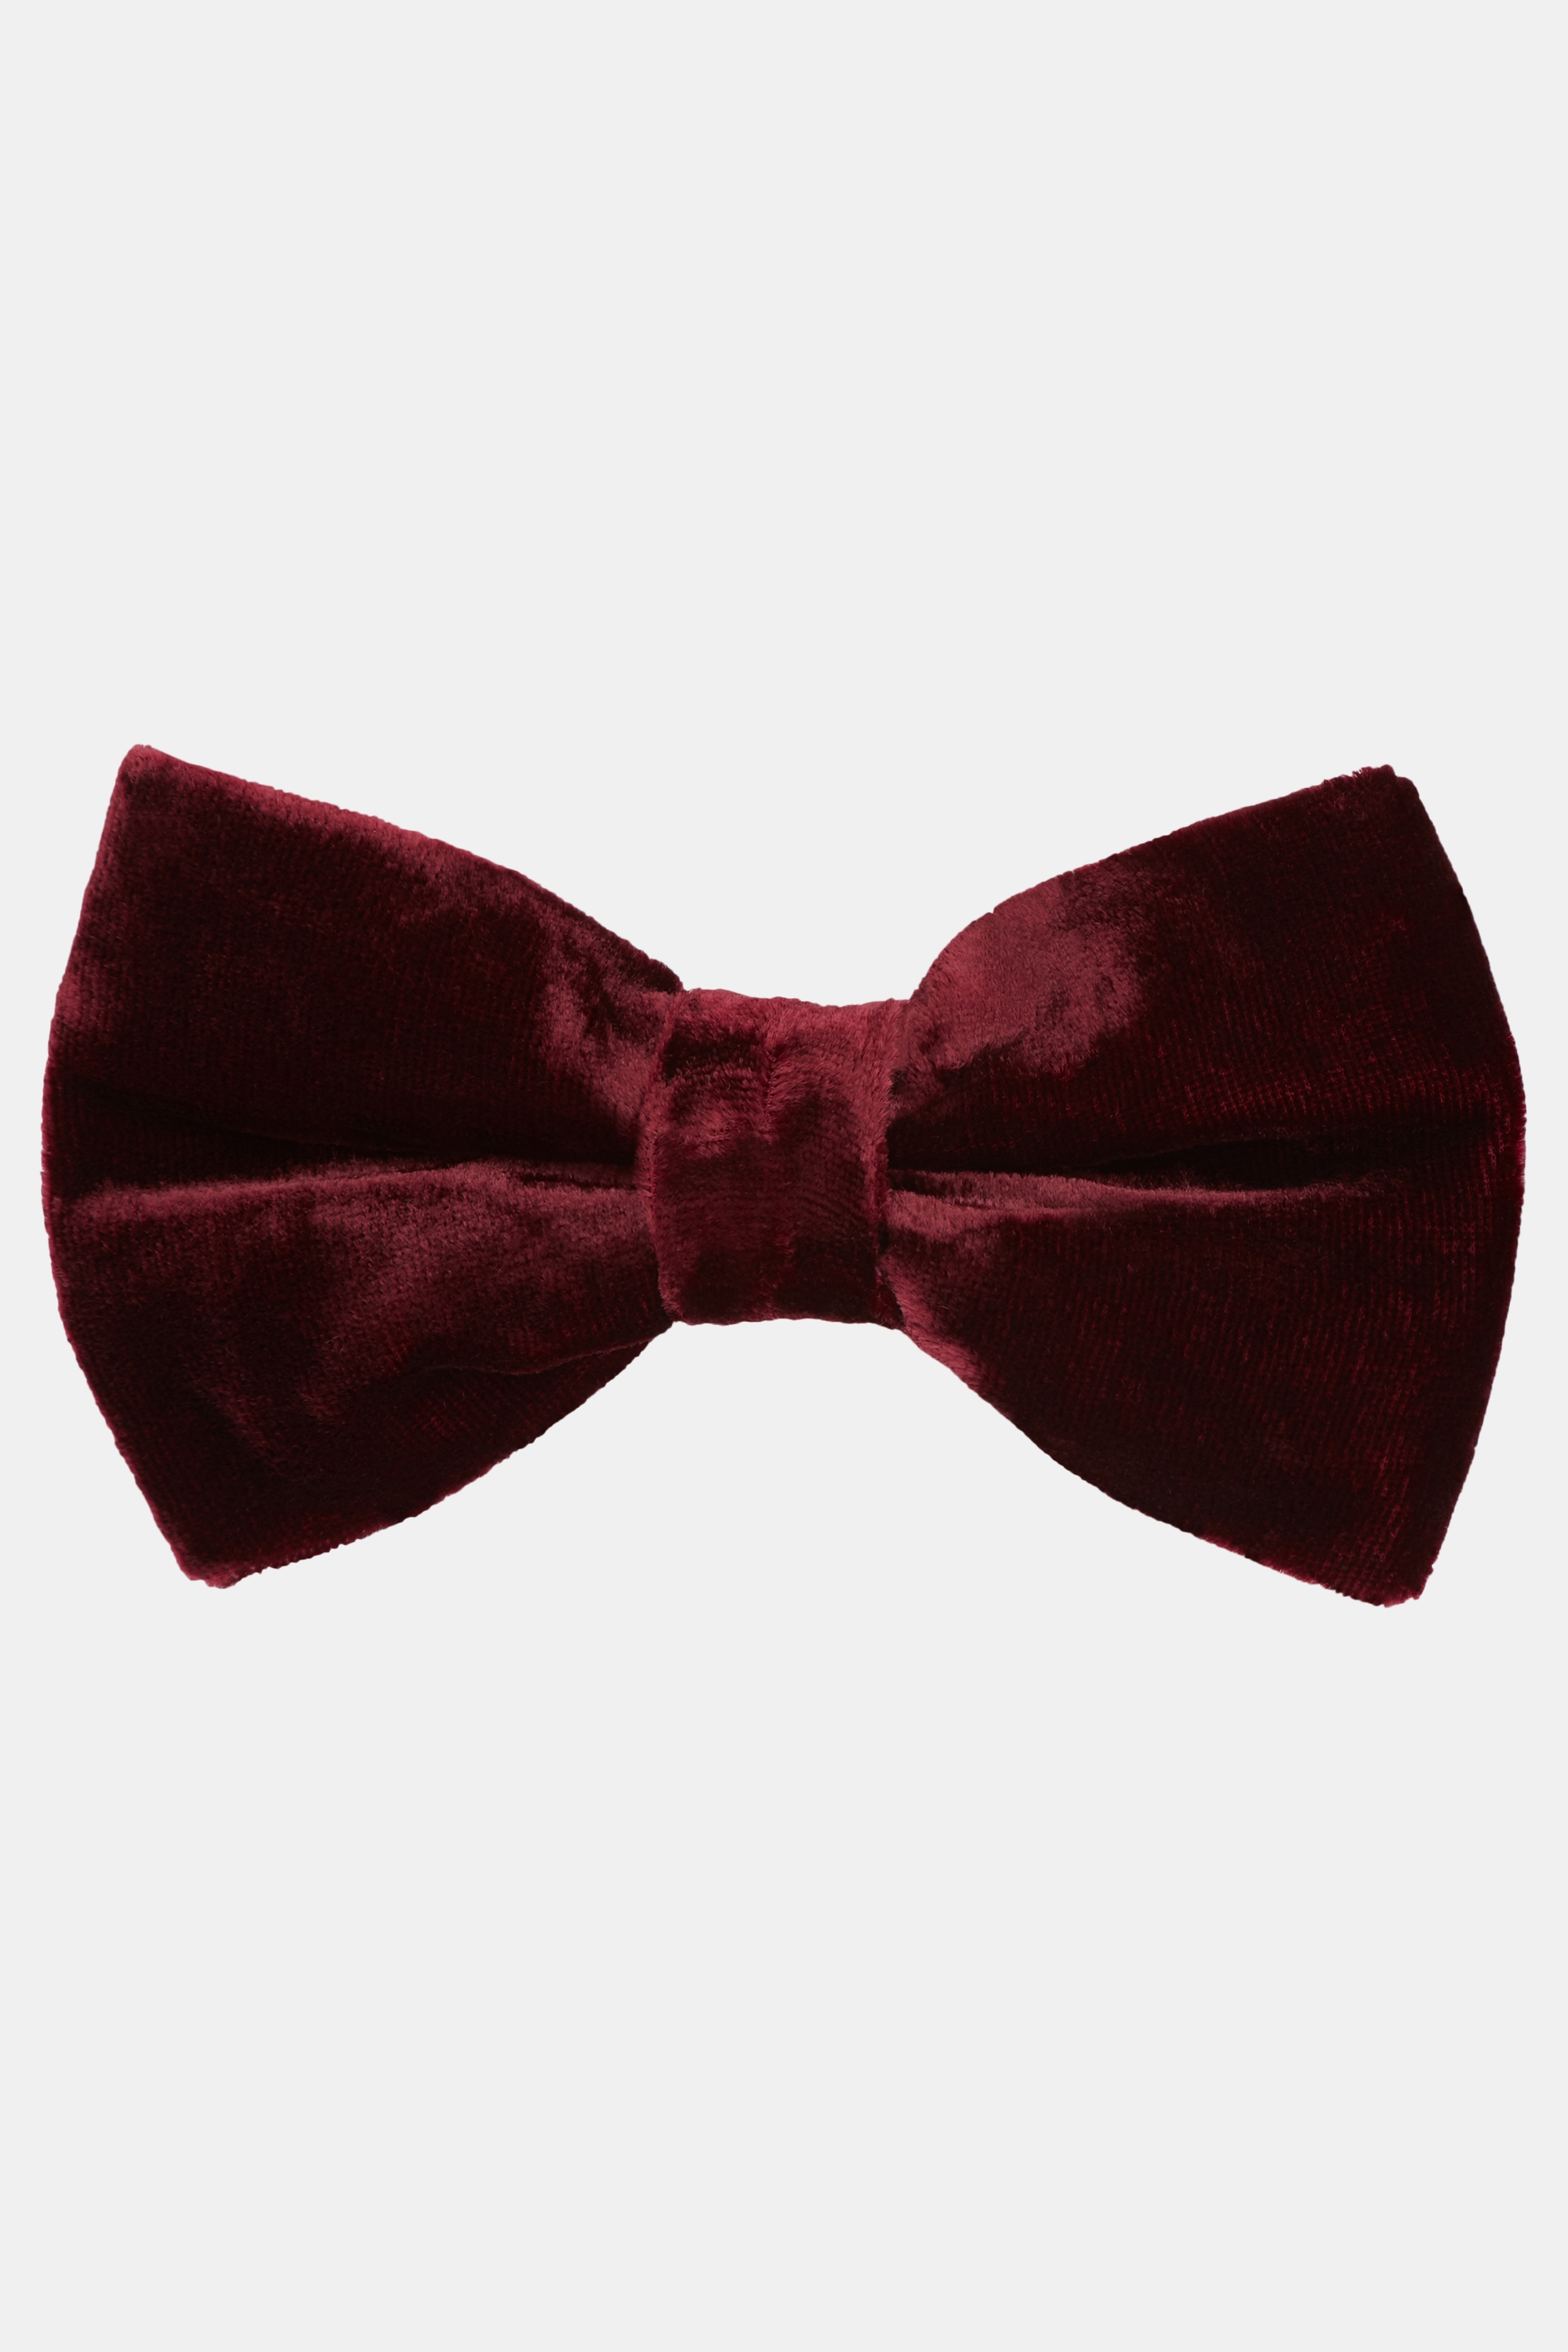 butterfly bow tie Red linen bow tie wedding bow ties pre tied bow ties Burgundy Red bow tie